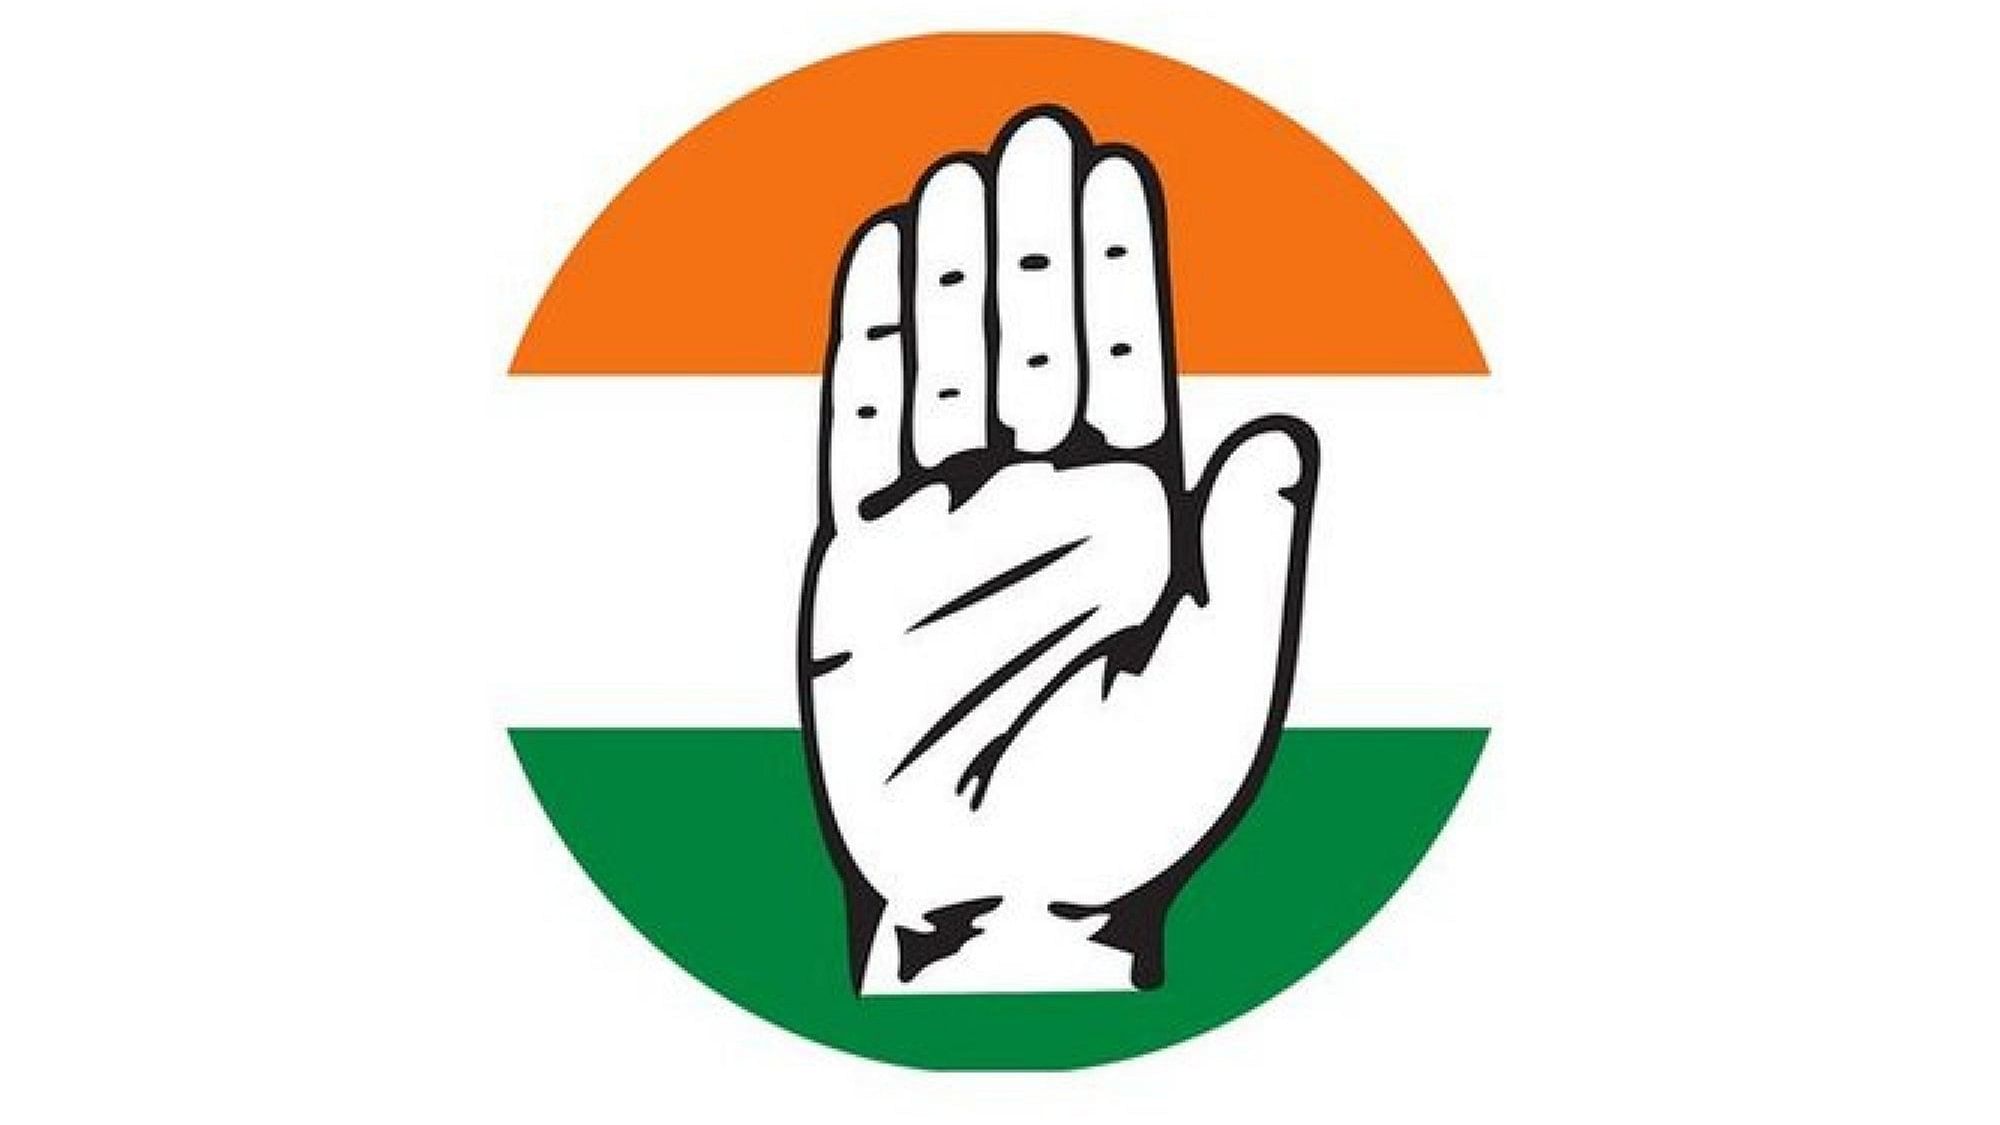 For the Congress, which is facing a leadership crisis after the drubbing it got in the December 2019 bypolls, the ULB results brought some solace. (File Image)